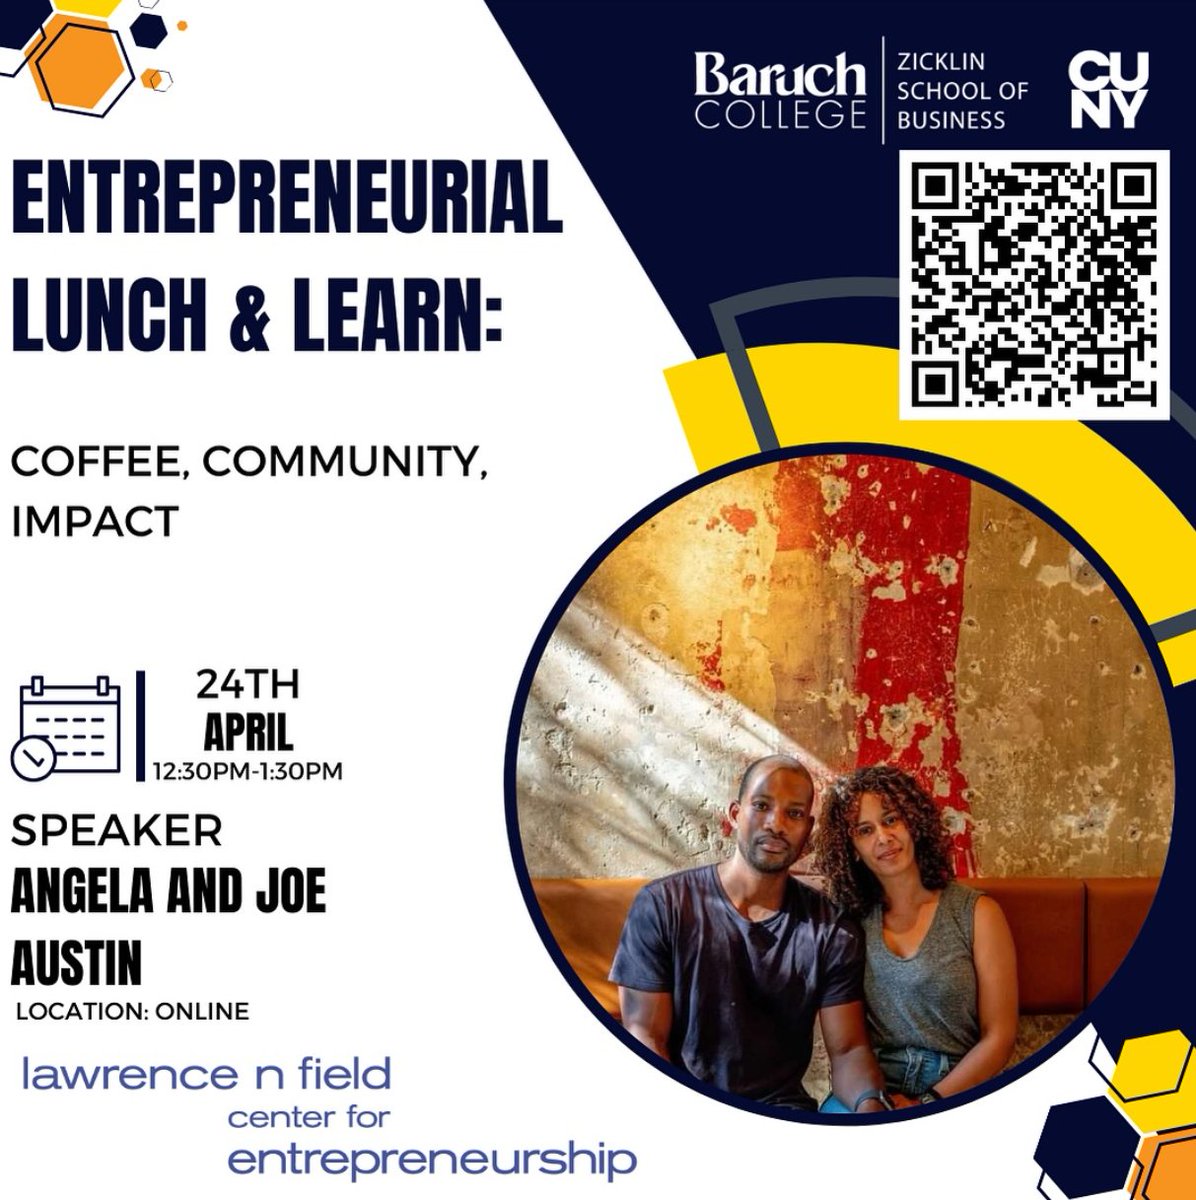 Join @Baruch_Zicklin's @EShipBaruch for their next Entrepreneurial Lunch & Learn with @BaruchCollege @baruchalumni Angela Austin, and Joe Austin, founders of Milk and Pull Coffee Shops. RSVP Here: zicklin.baruch.cuny.edu/event/entrepre… #ZicklinBusiness #Entrepreneur #coffee #smallbusiness